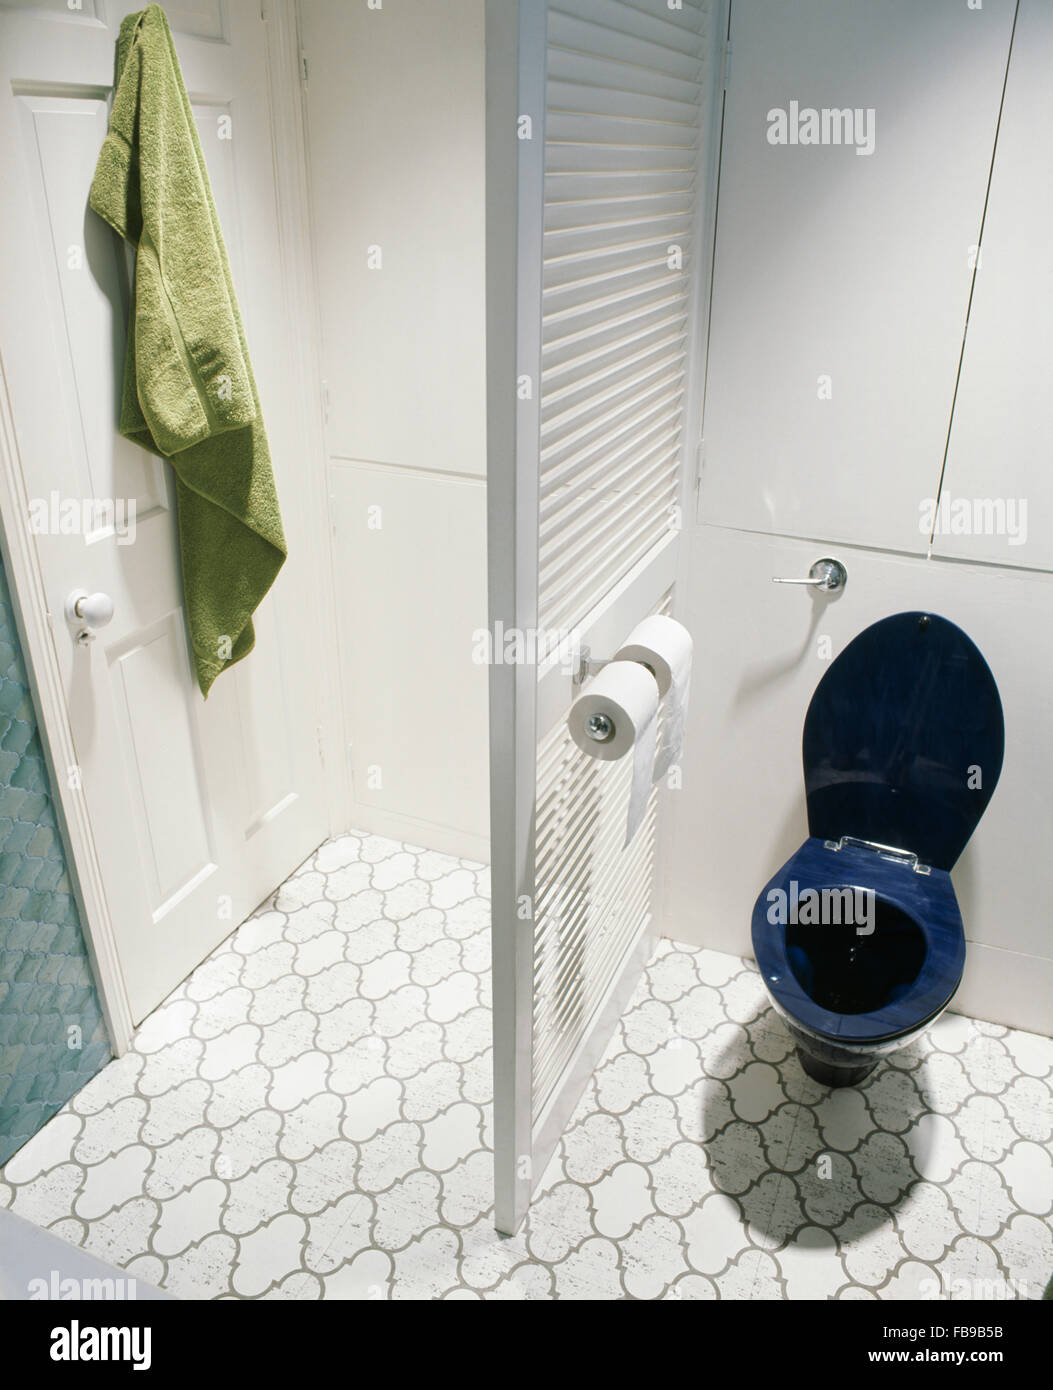 Blue toilet and louvre room divider in seventies bathroom with white tiled  floor Stock Photo - Alamy